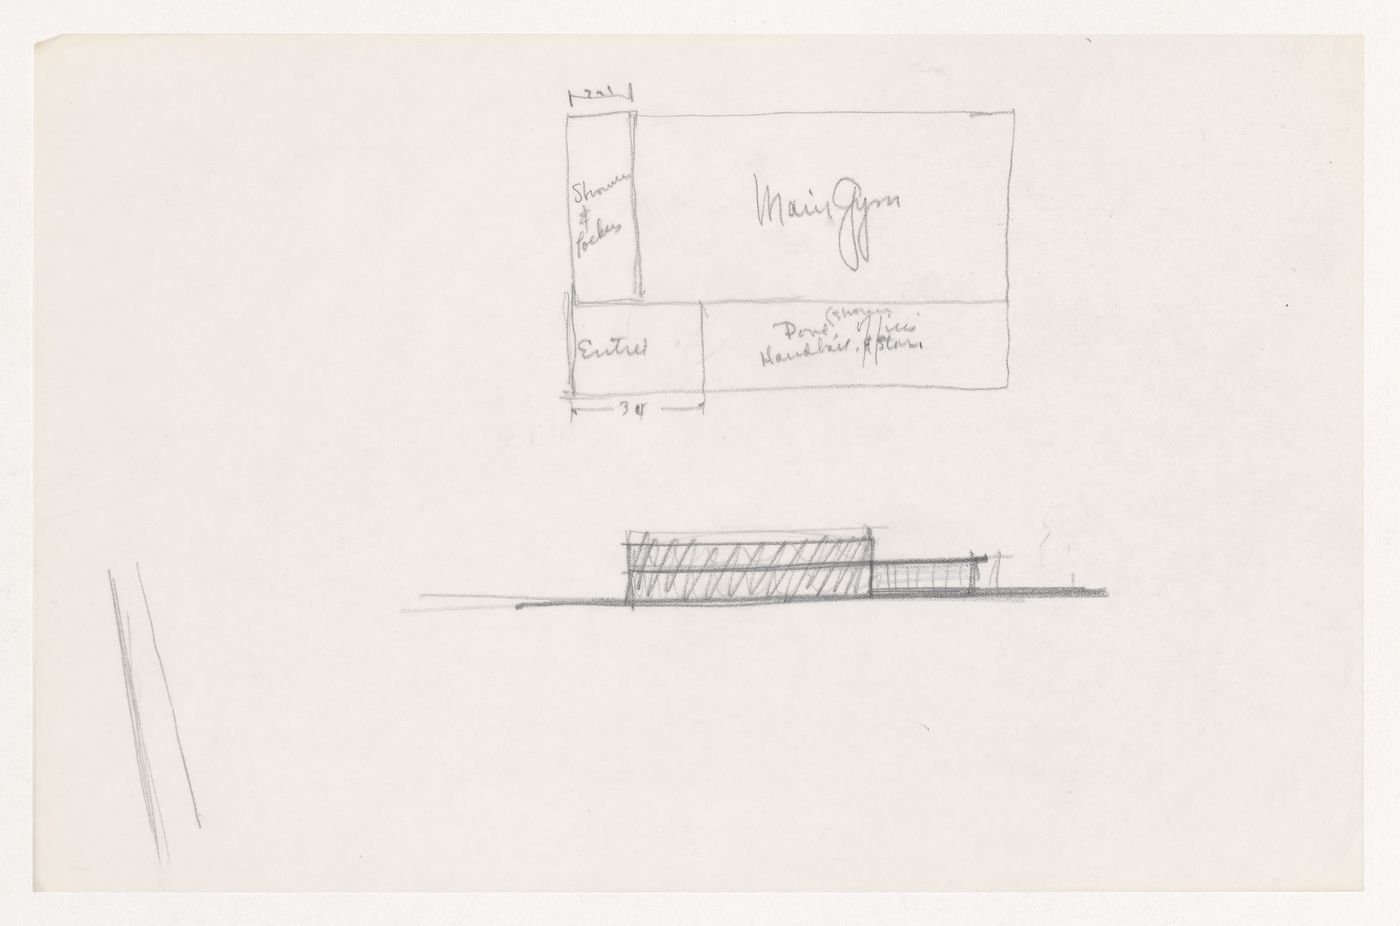 Sketch plan and sketch elevation for the Gymnasium and Natatorium